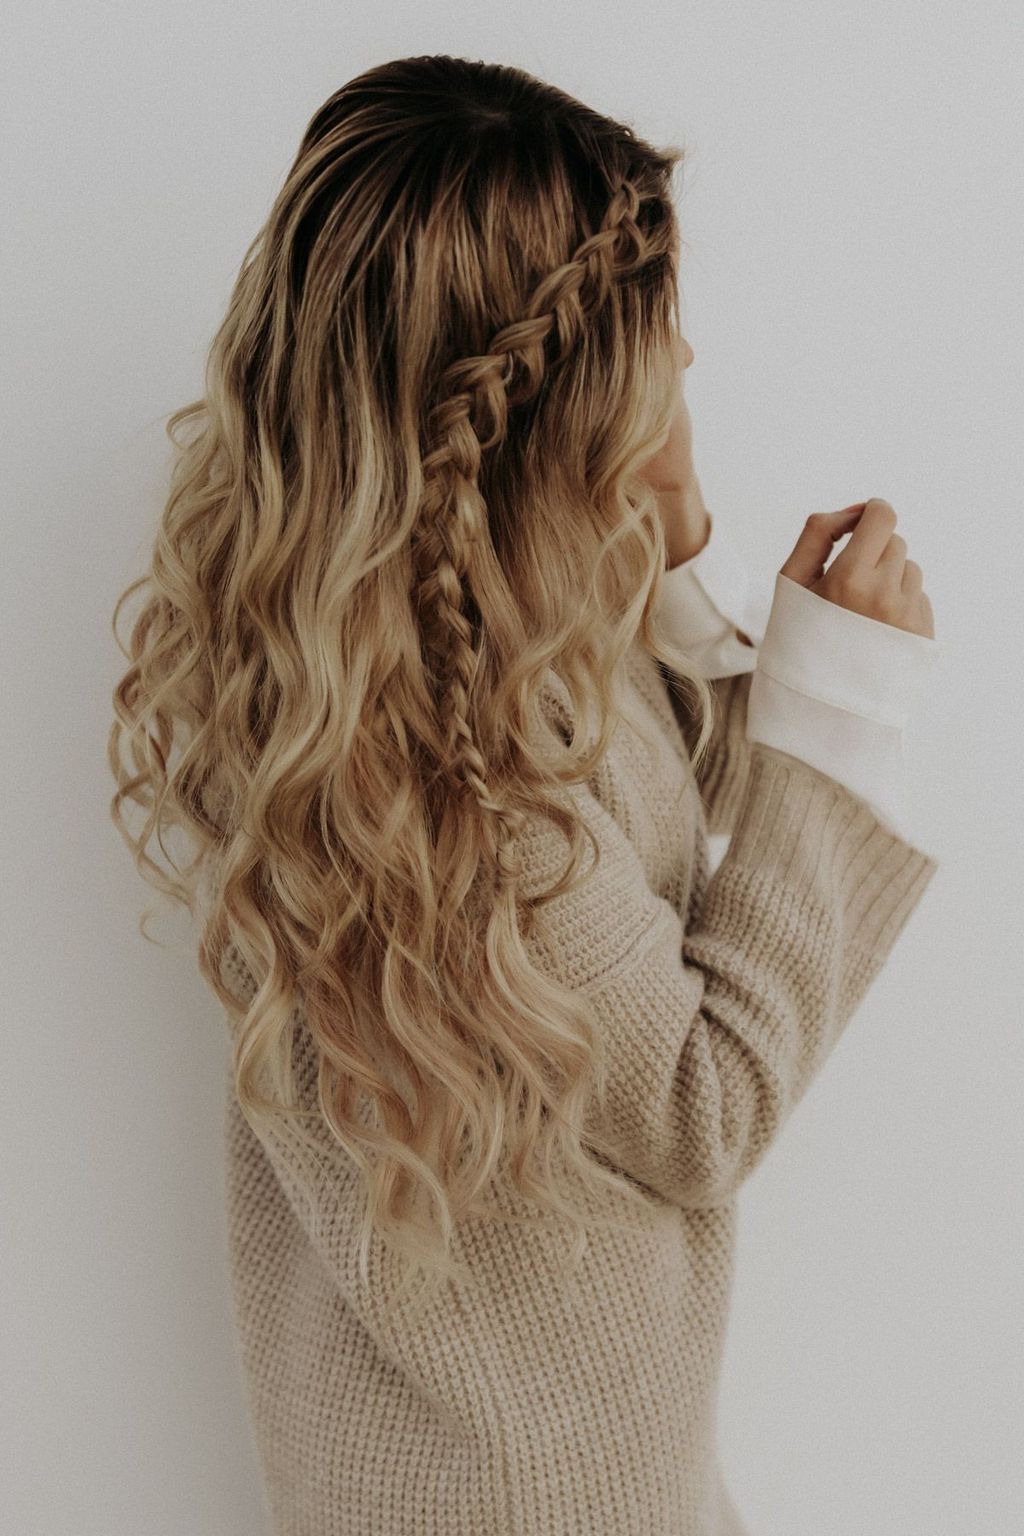 50 Easy Braid Hairstyles Ideas For Holiday Season -   10 how to get hair Goals ideas